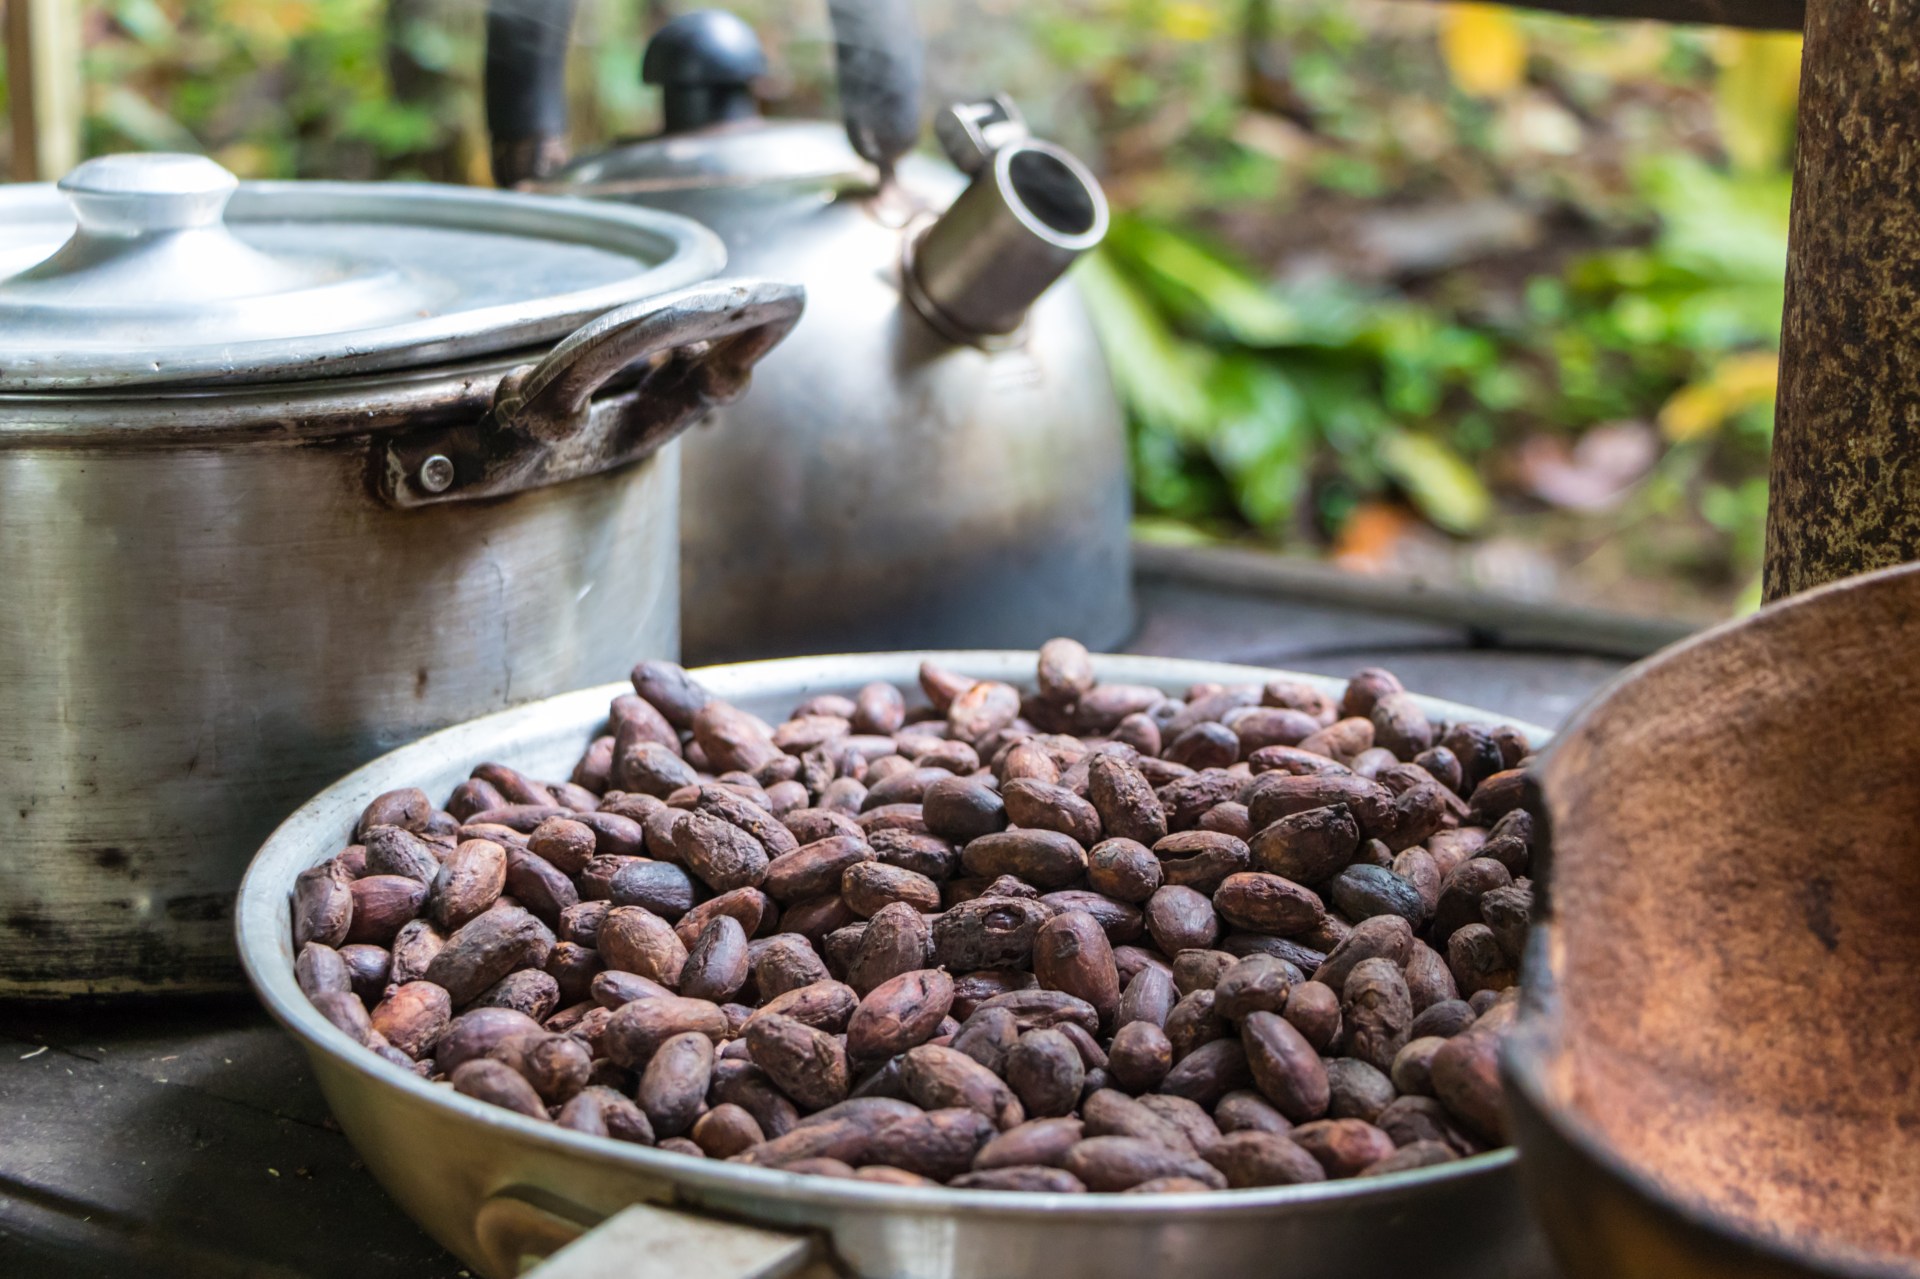 roasted cocoa beans - Photo Credit: Joseph Jacobs/Shutterstock